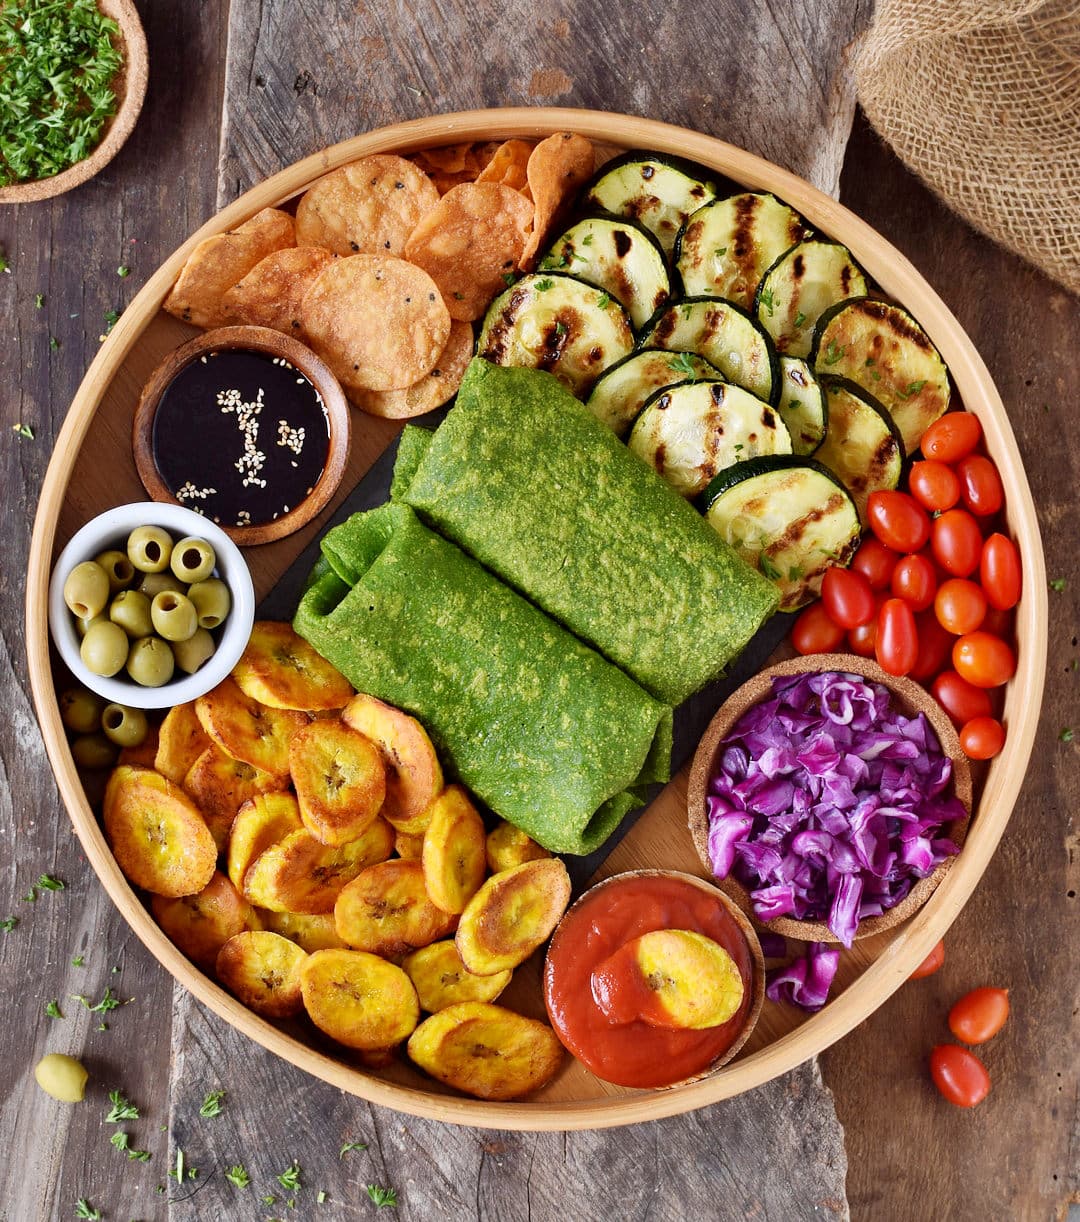 Homemade green spinach tortillas with 3 ingredients. The recipe is healthy, gluten-free, vegan, wheat-free, corn-free, great for kids, and easy to make. Perfect for wraps, tacos, burritos, enchiladas, quesadillas.